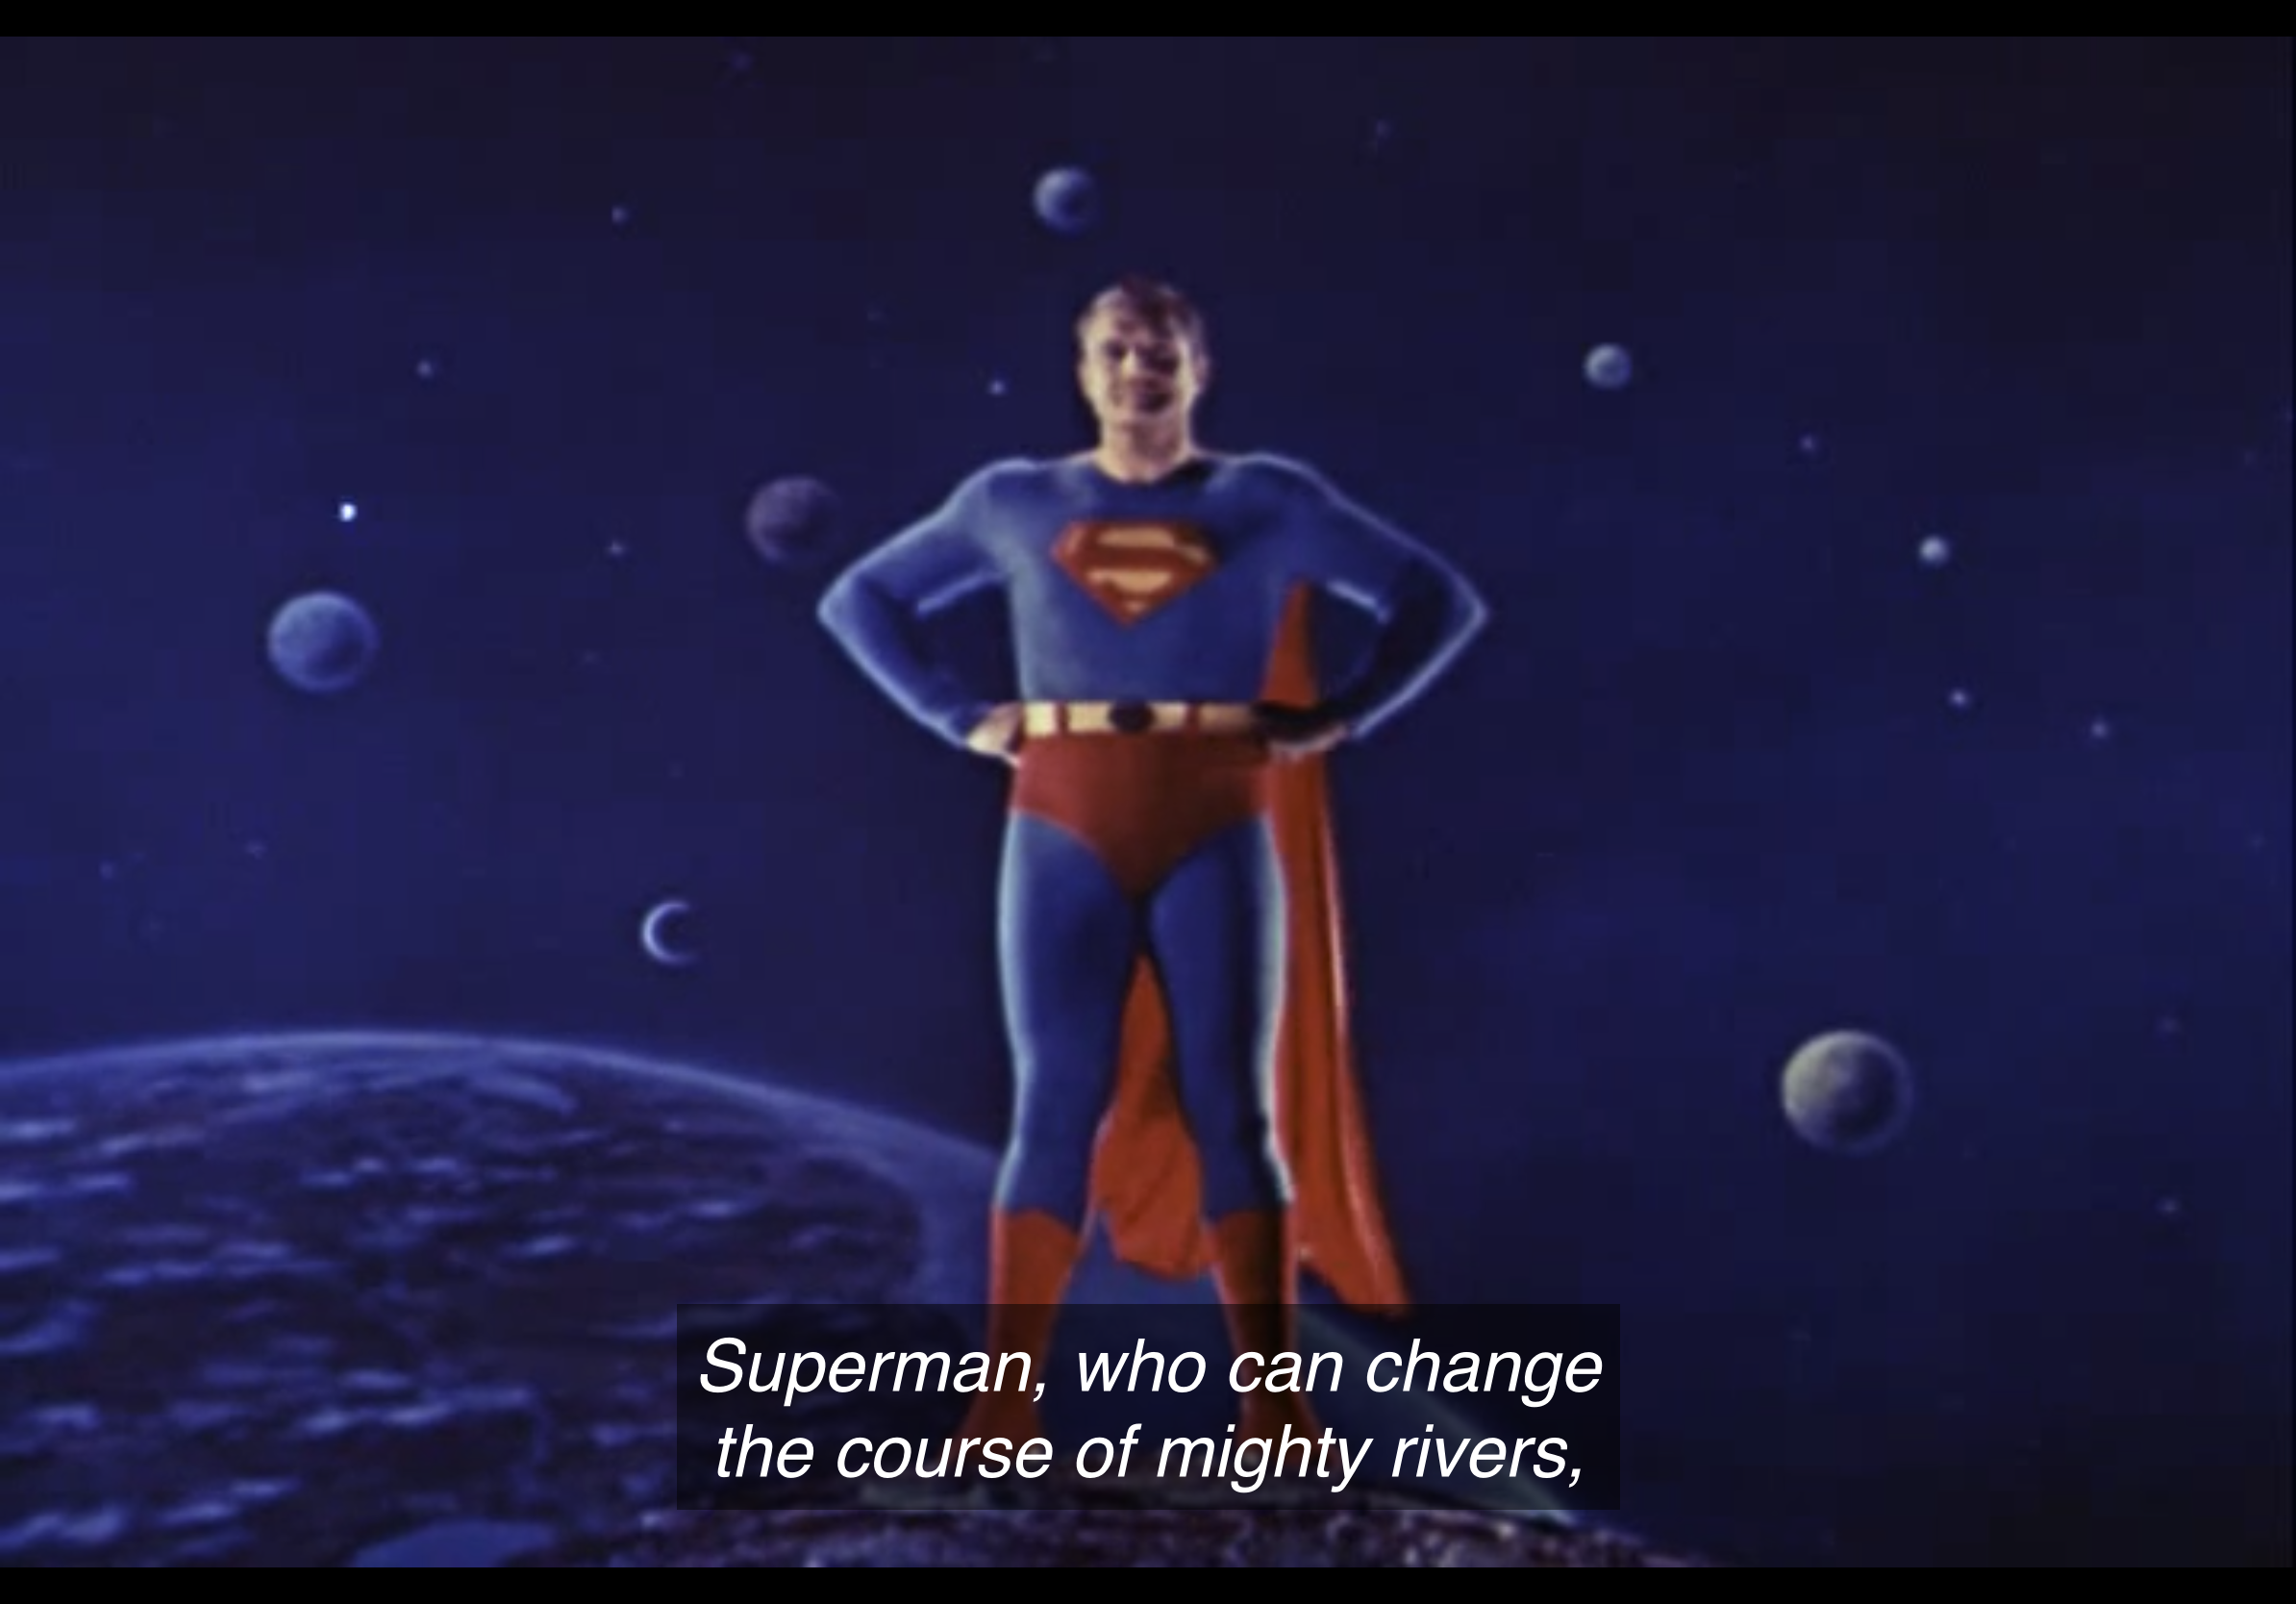 Still frame of Adventures of Superman opening, Stuperman posing, with caption “Superman, who can change the course of mighty rivers” visible.